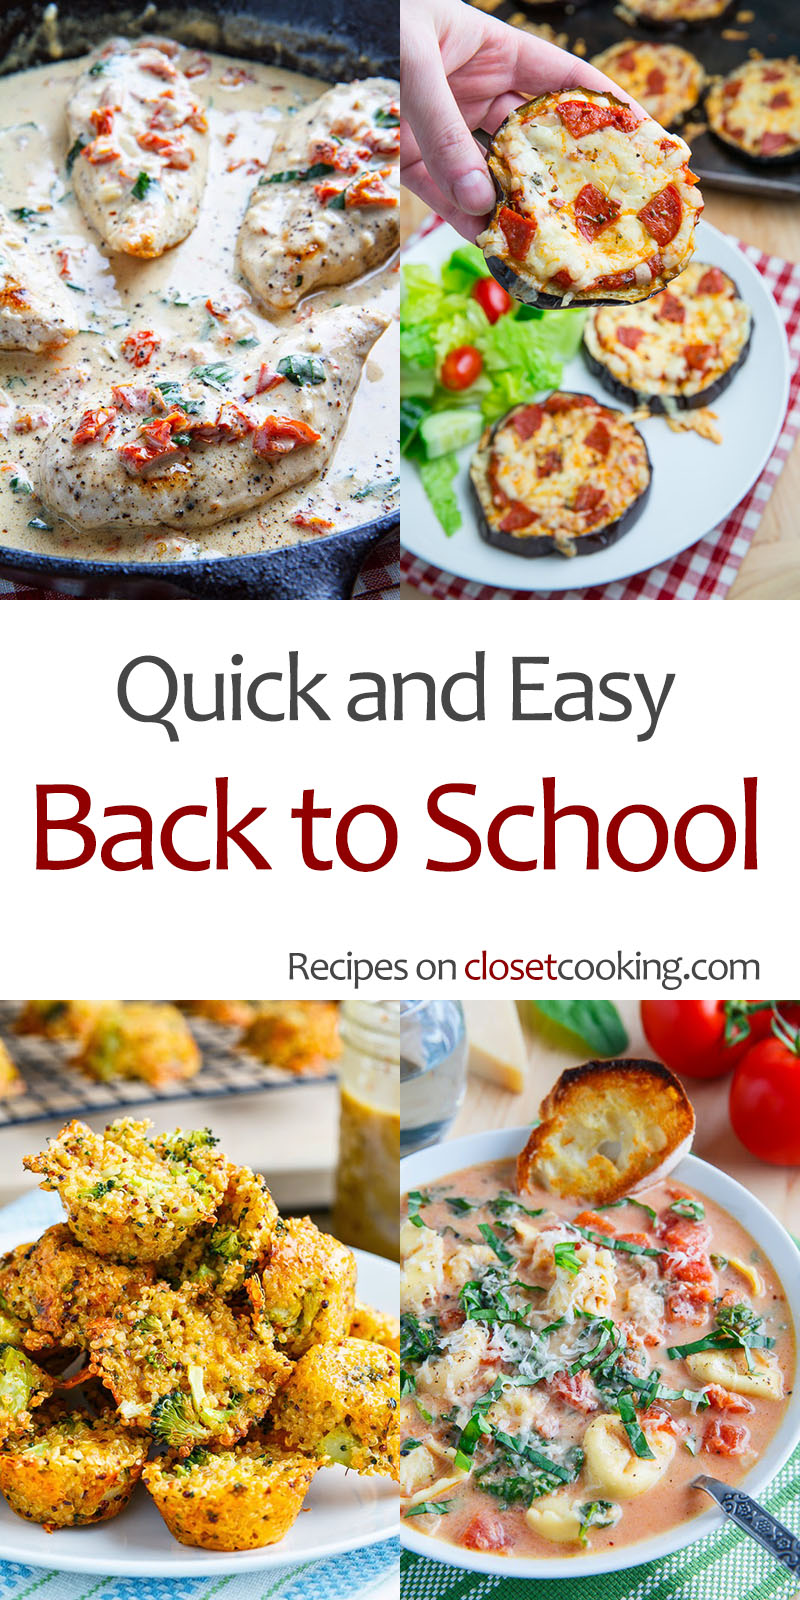 Quick and Easy Back to School Recipes